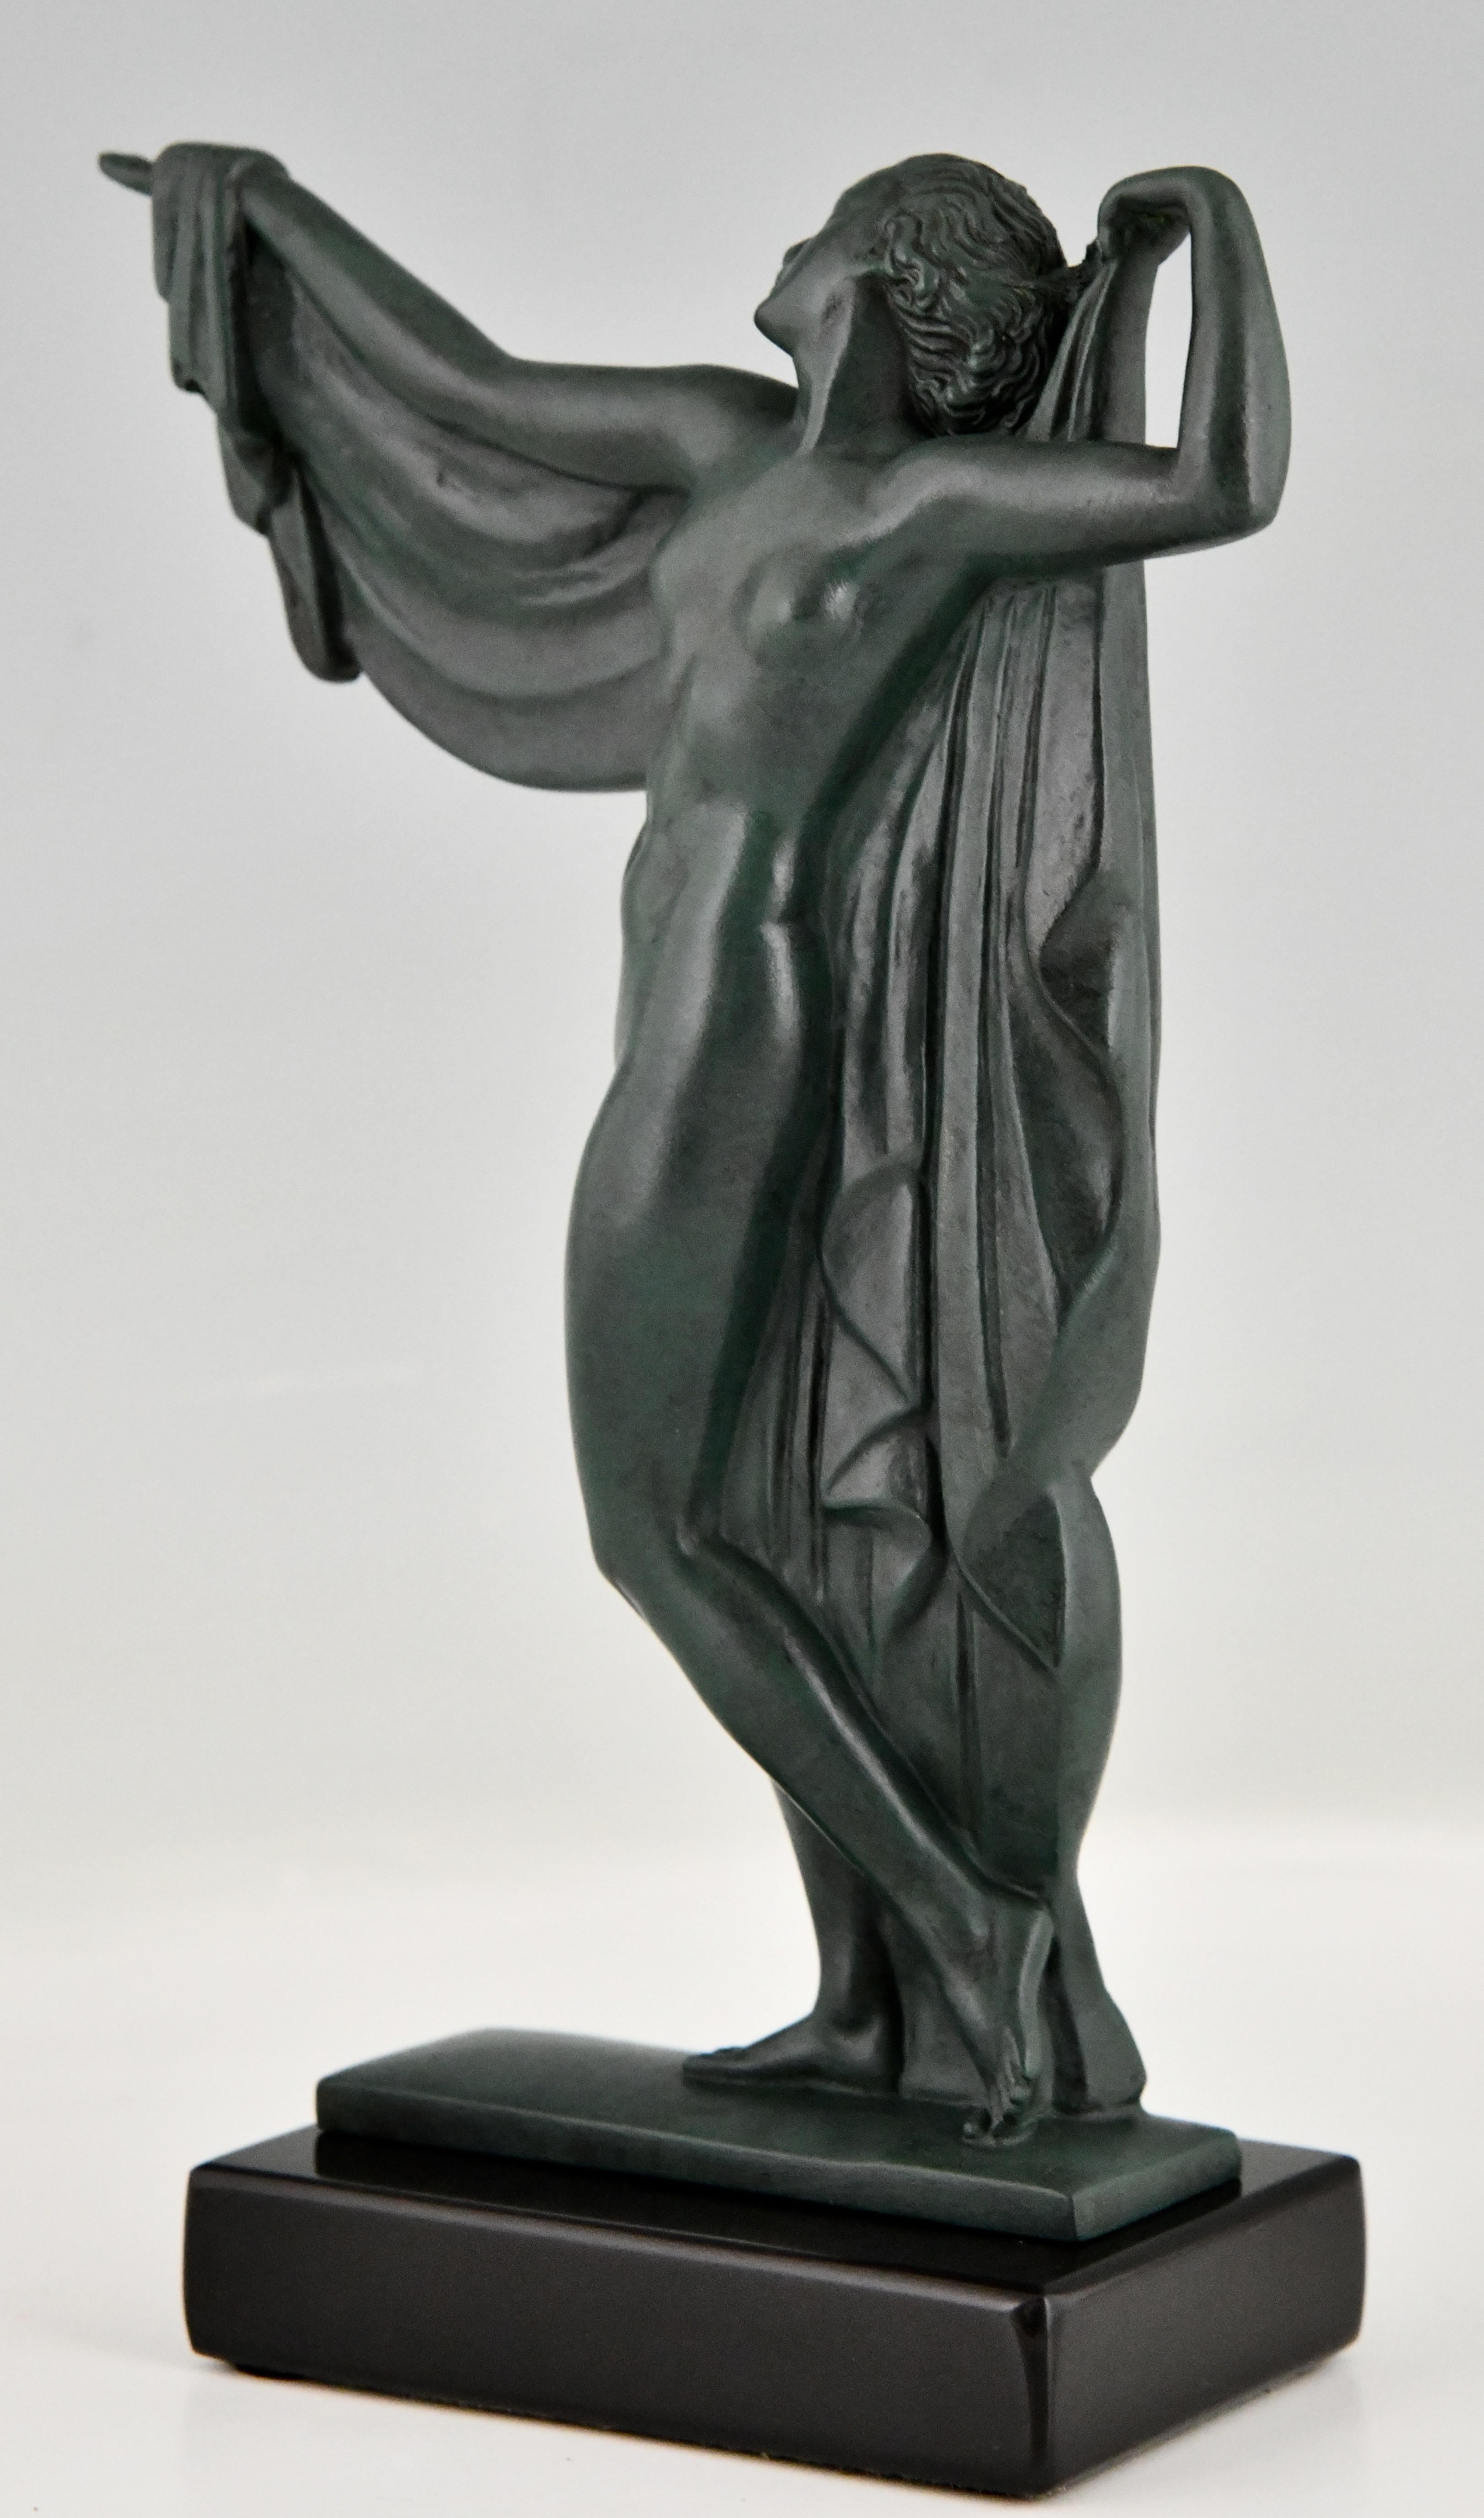 Mid-20th Century Art Deco Sculpture Bathing Nude Venus by Fayral Max Le Verrier, France, 1930